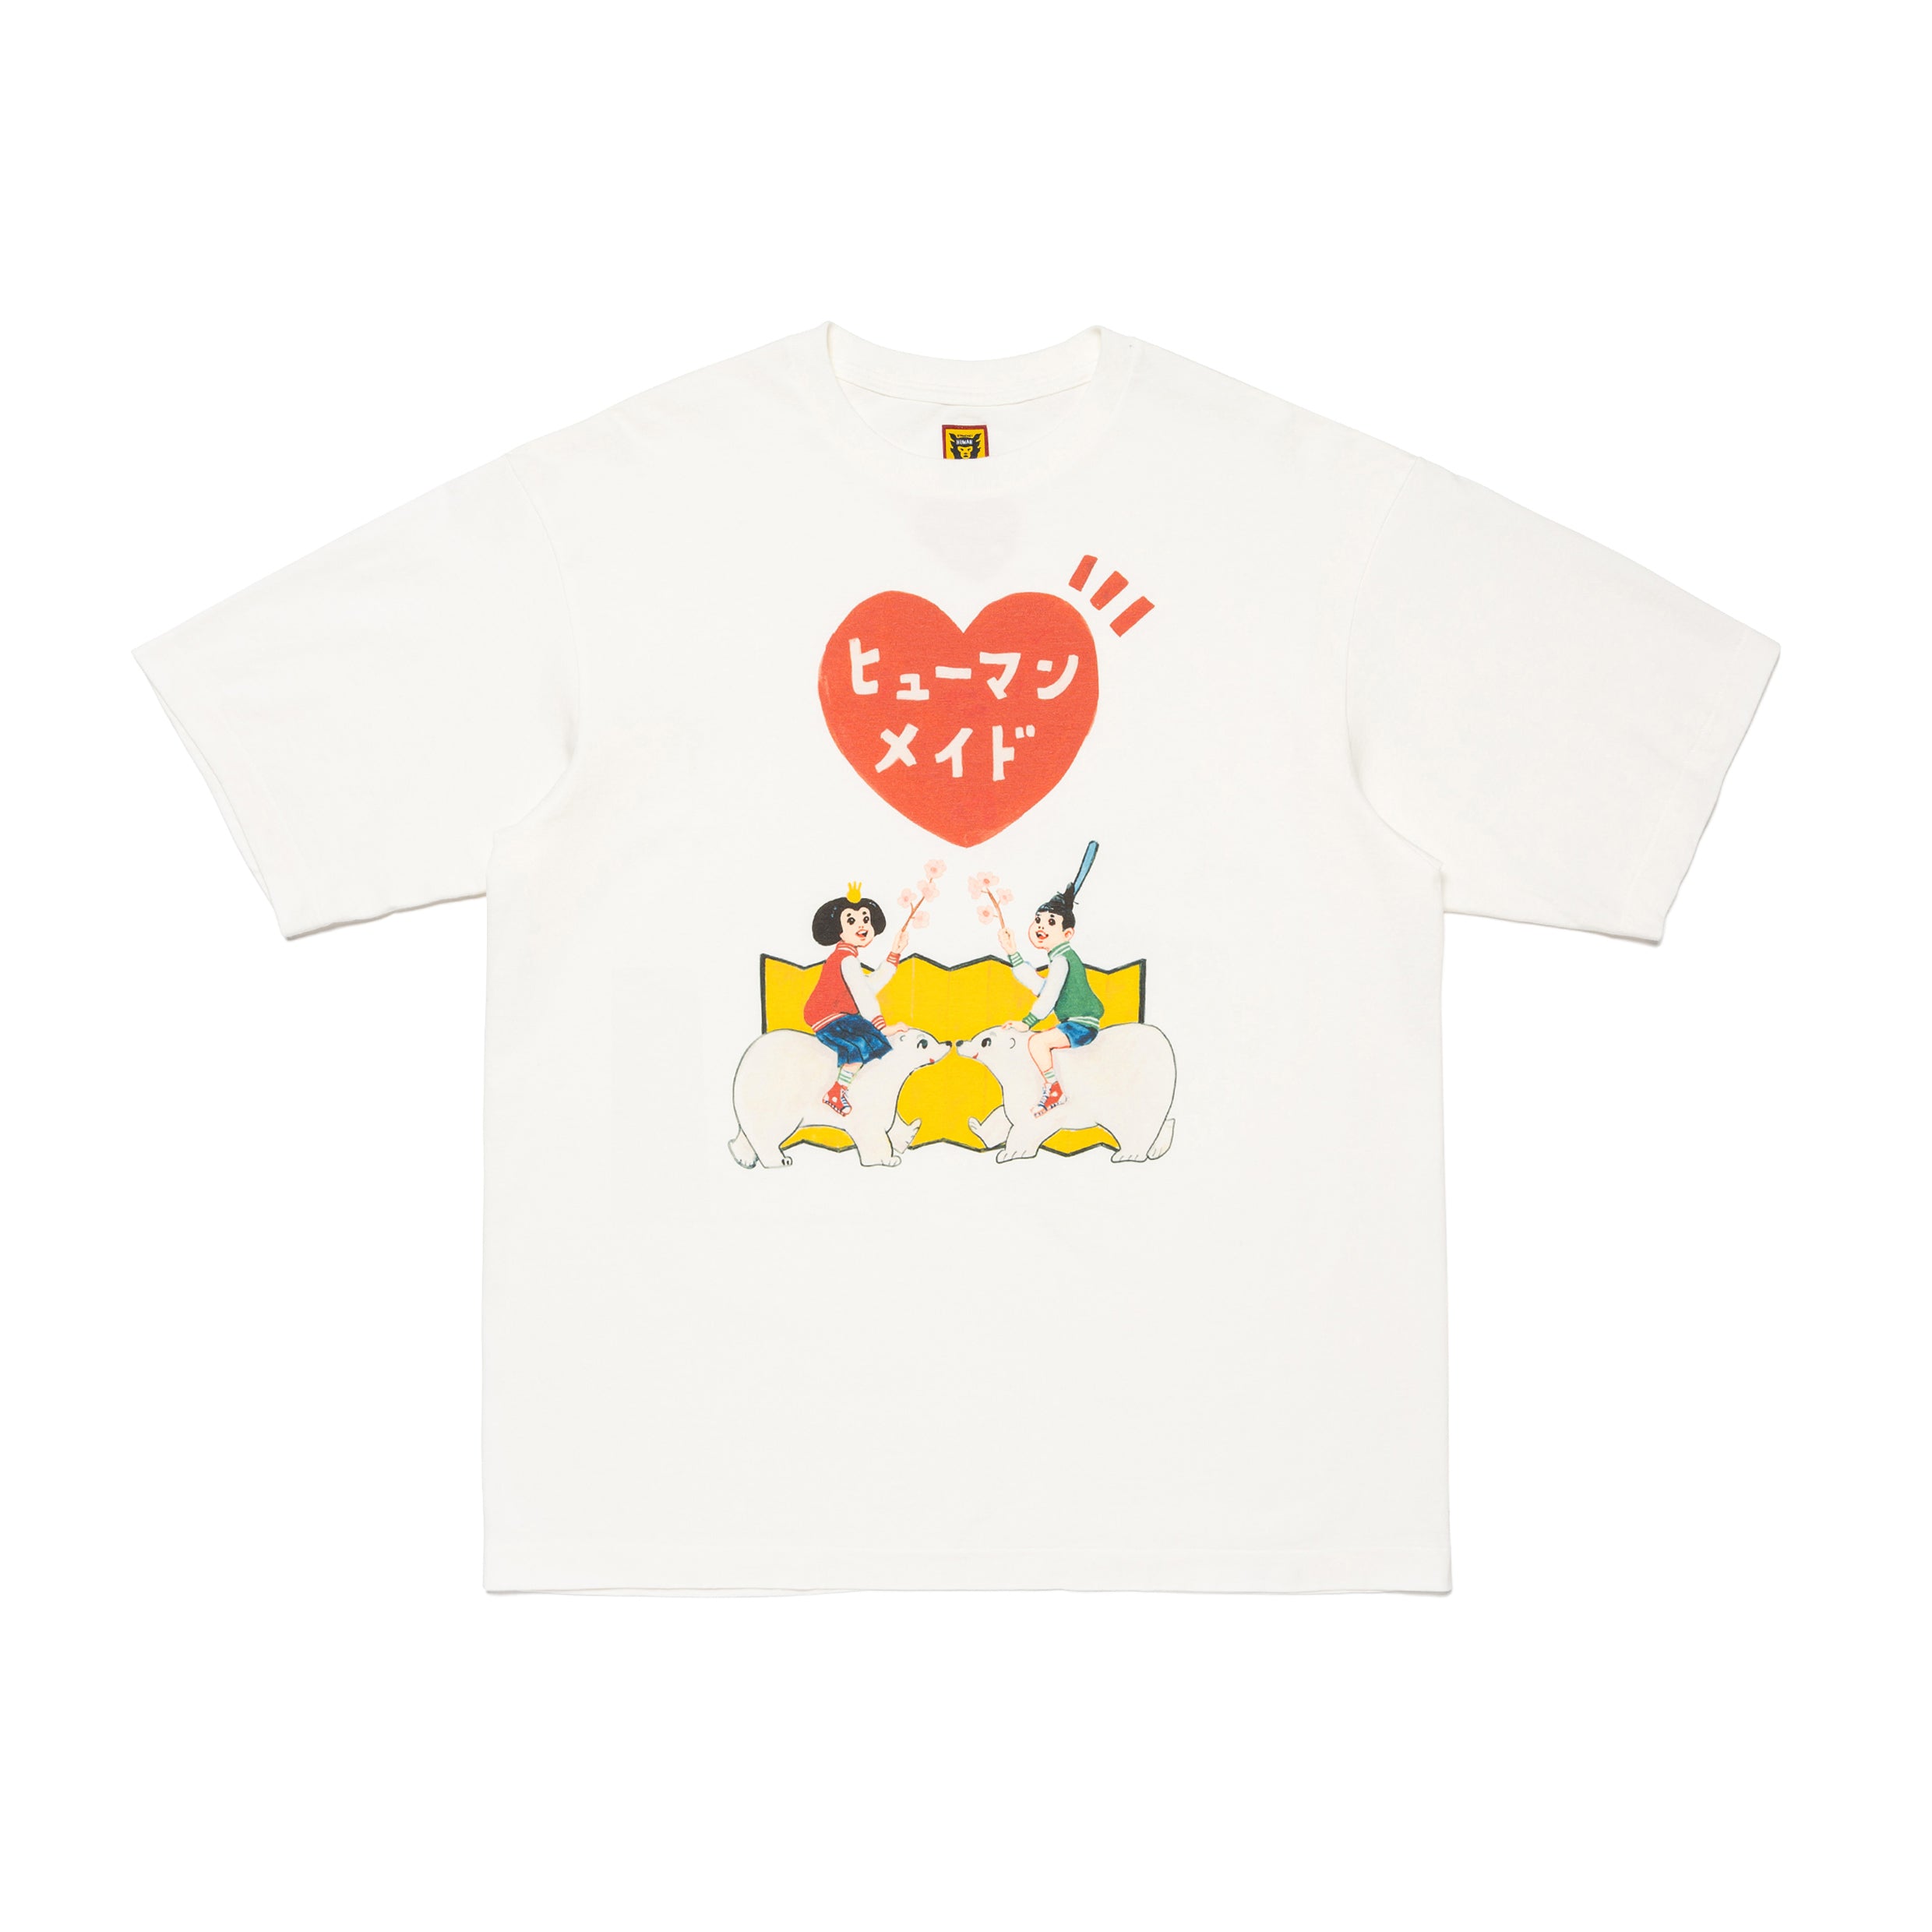 KEIKO SOOTOME T-SHIRT #18 – HUMAN MADE ONLINE STORE